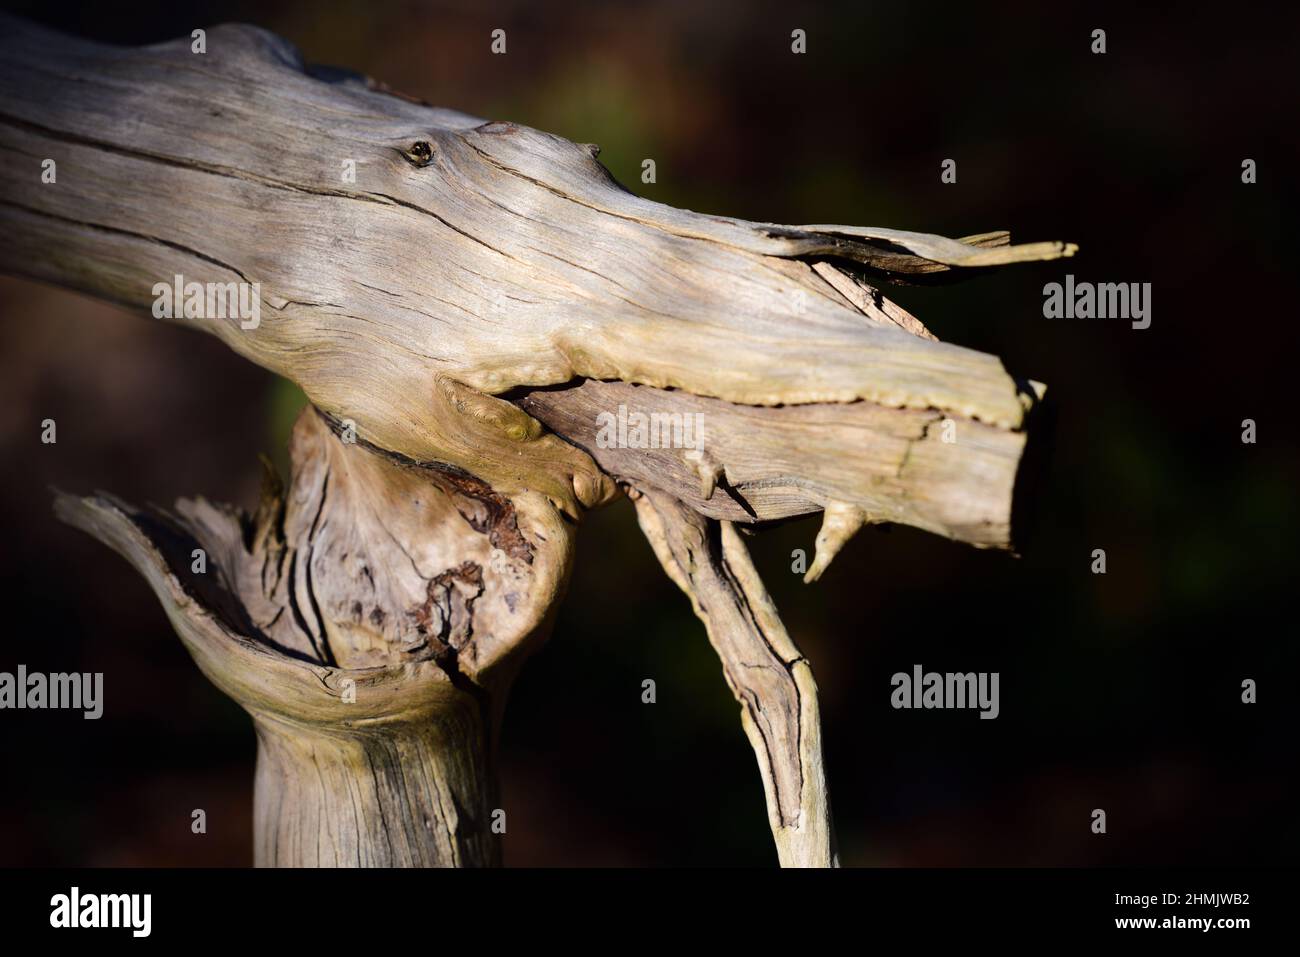 An old pale piece of wood from the root of a tree happens to be in the shape of a dragon's head with its mouth open, against a dark background in natu Stock Photo